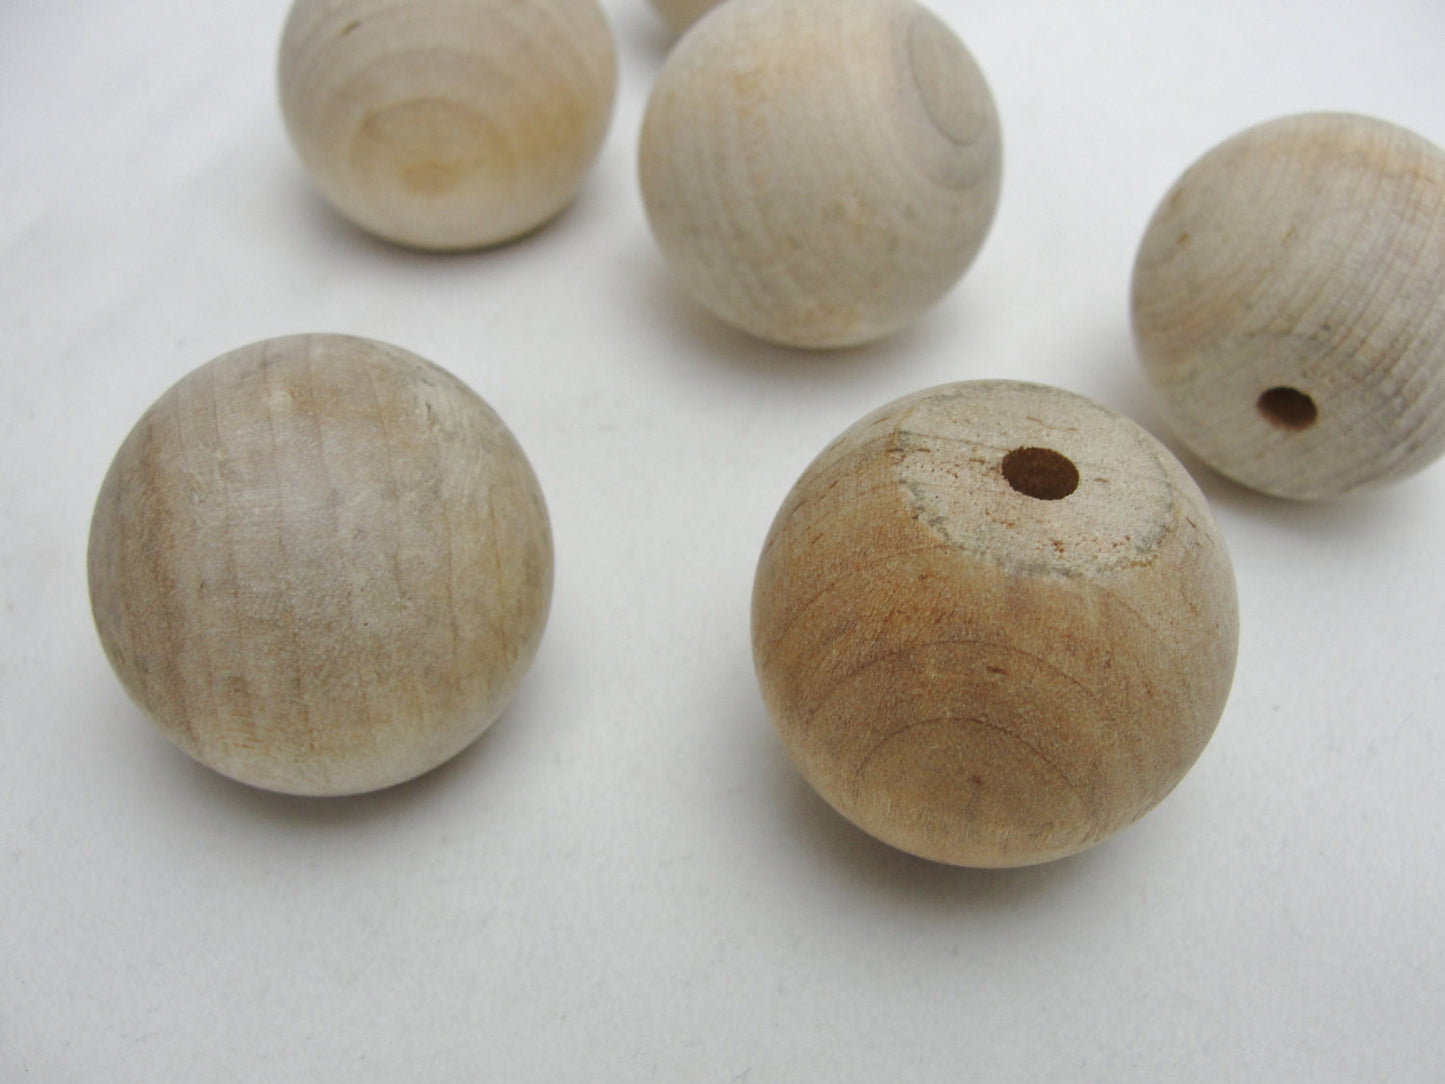 6 Wooden ball knob 1" (1 inch ball knob) solid wood - Wood parts - Craft Supply House